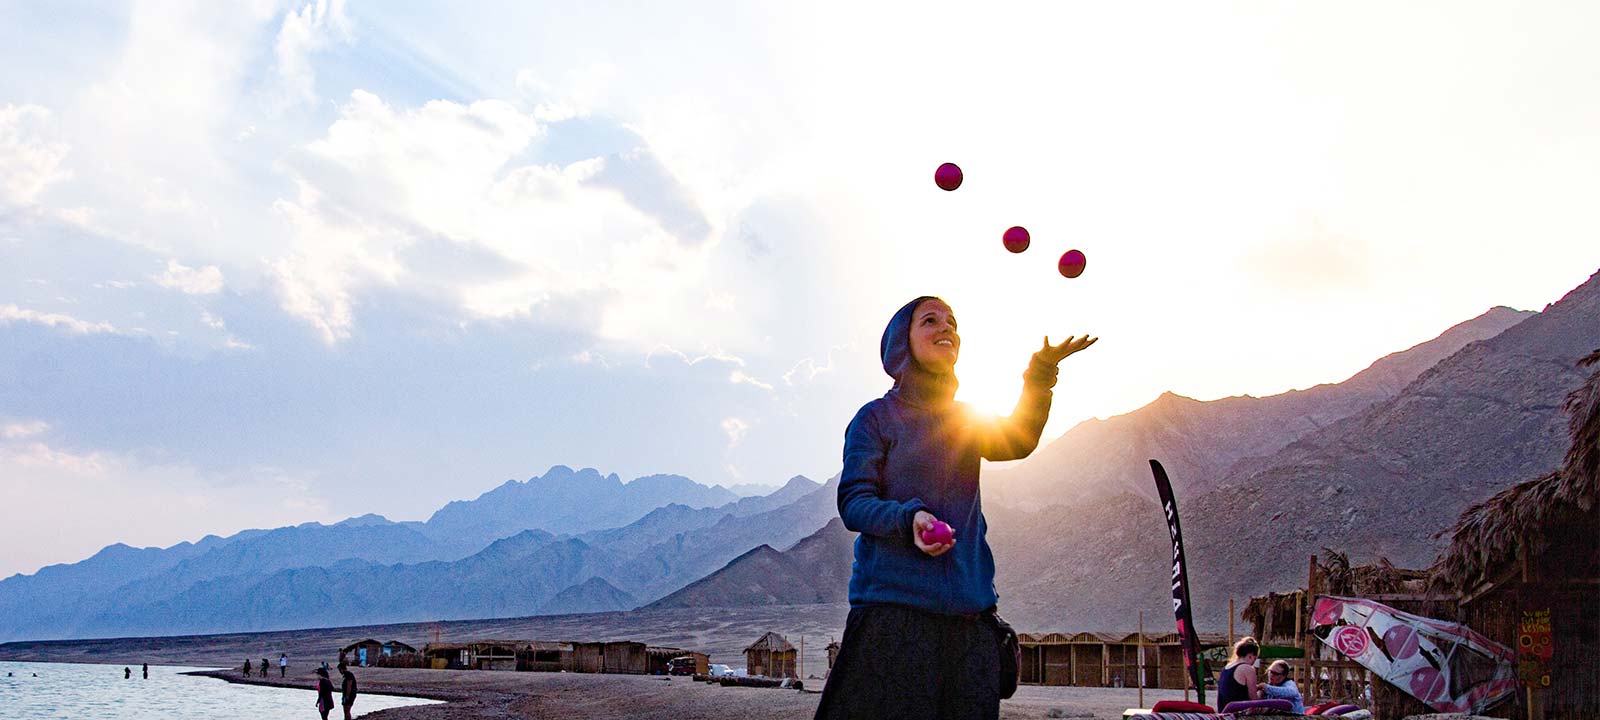 Photo of a lady juggling